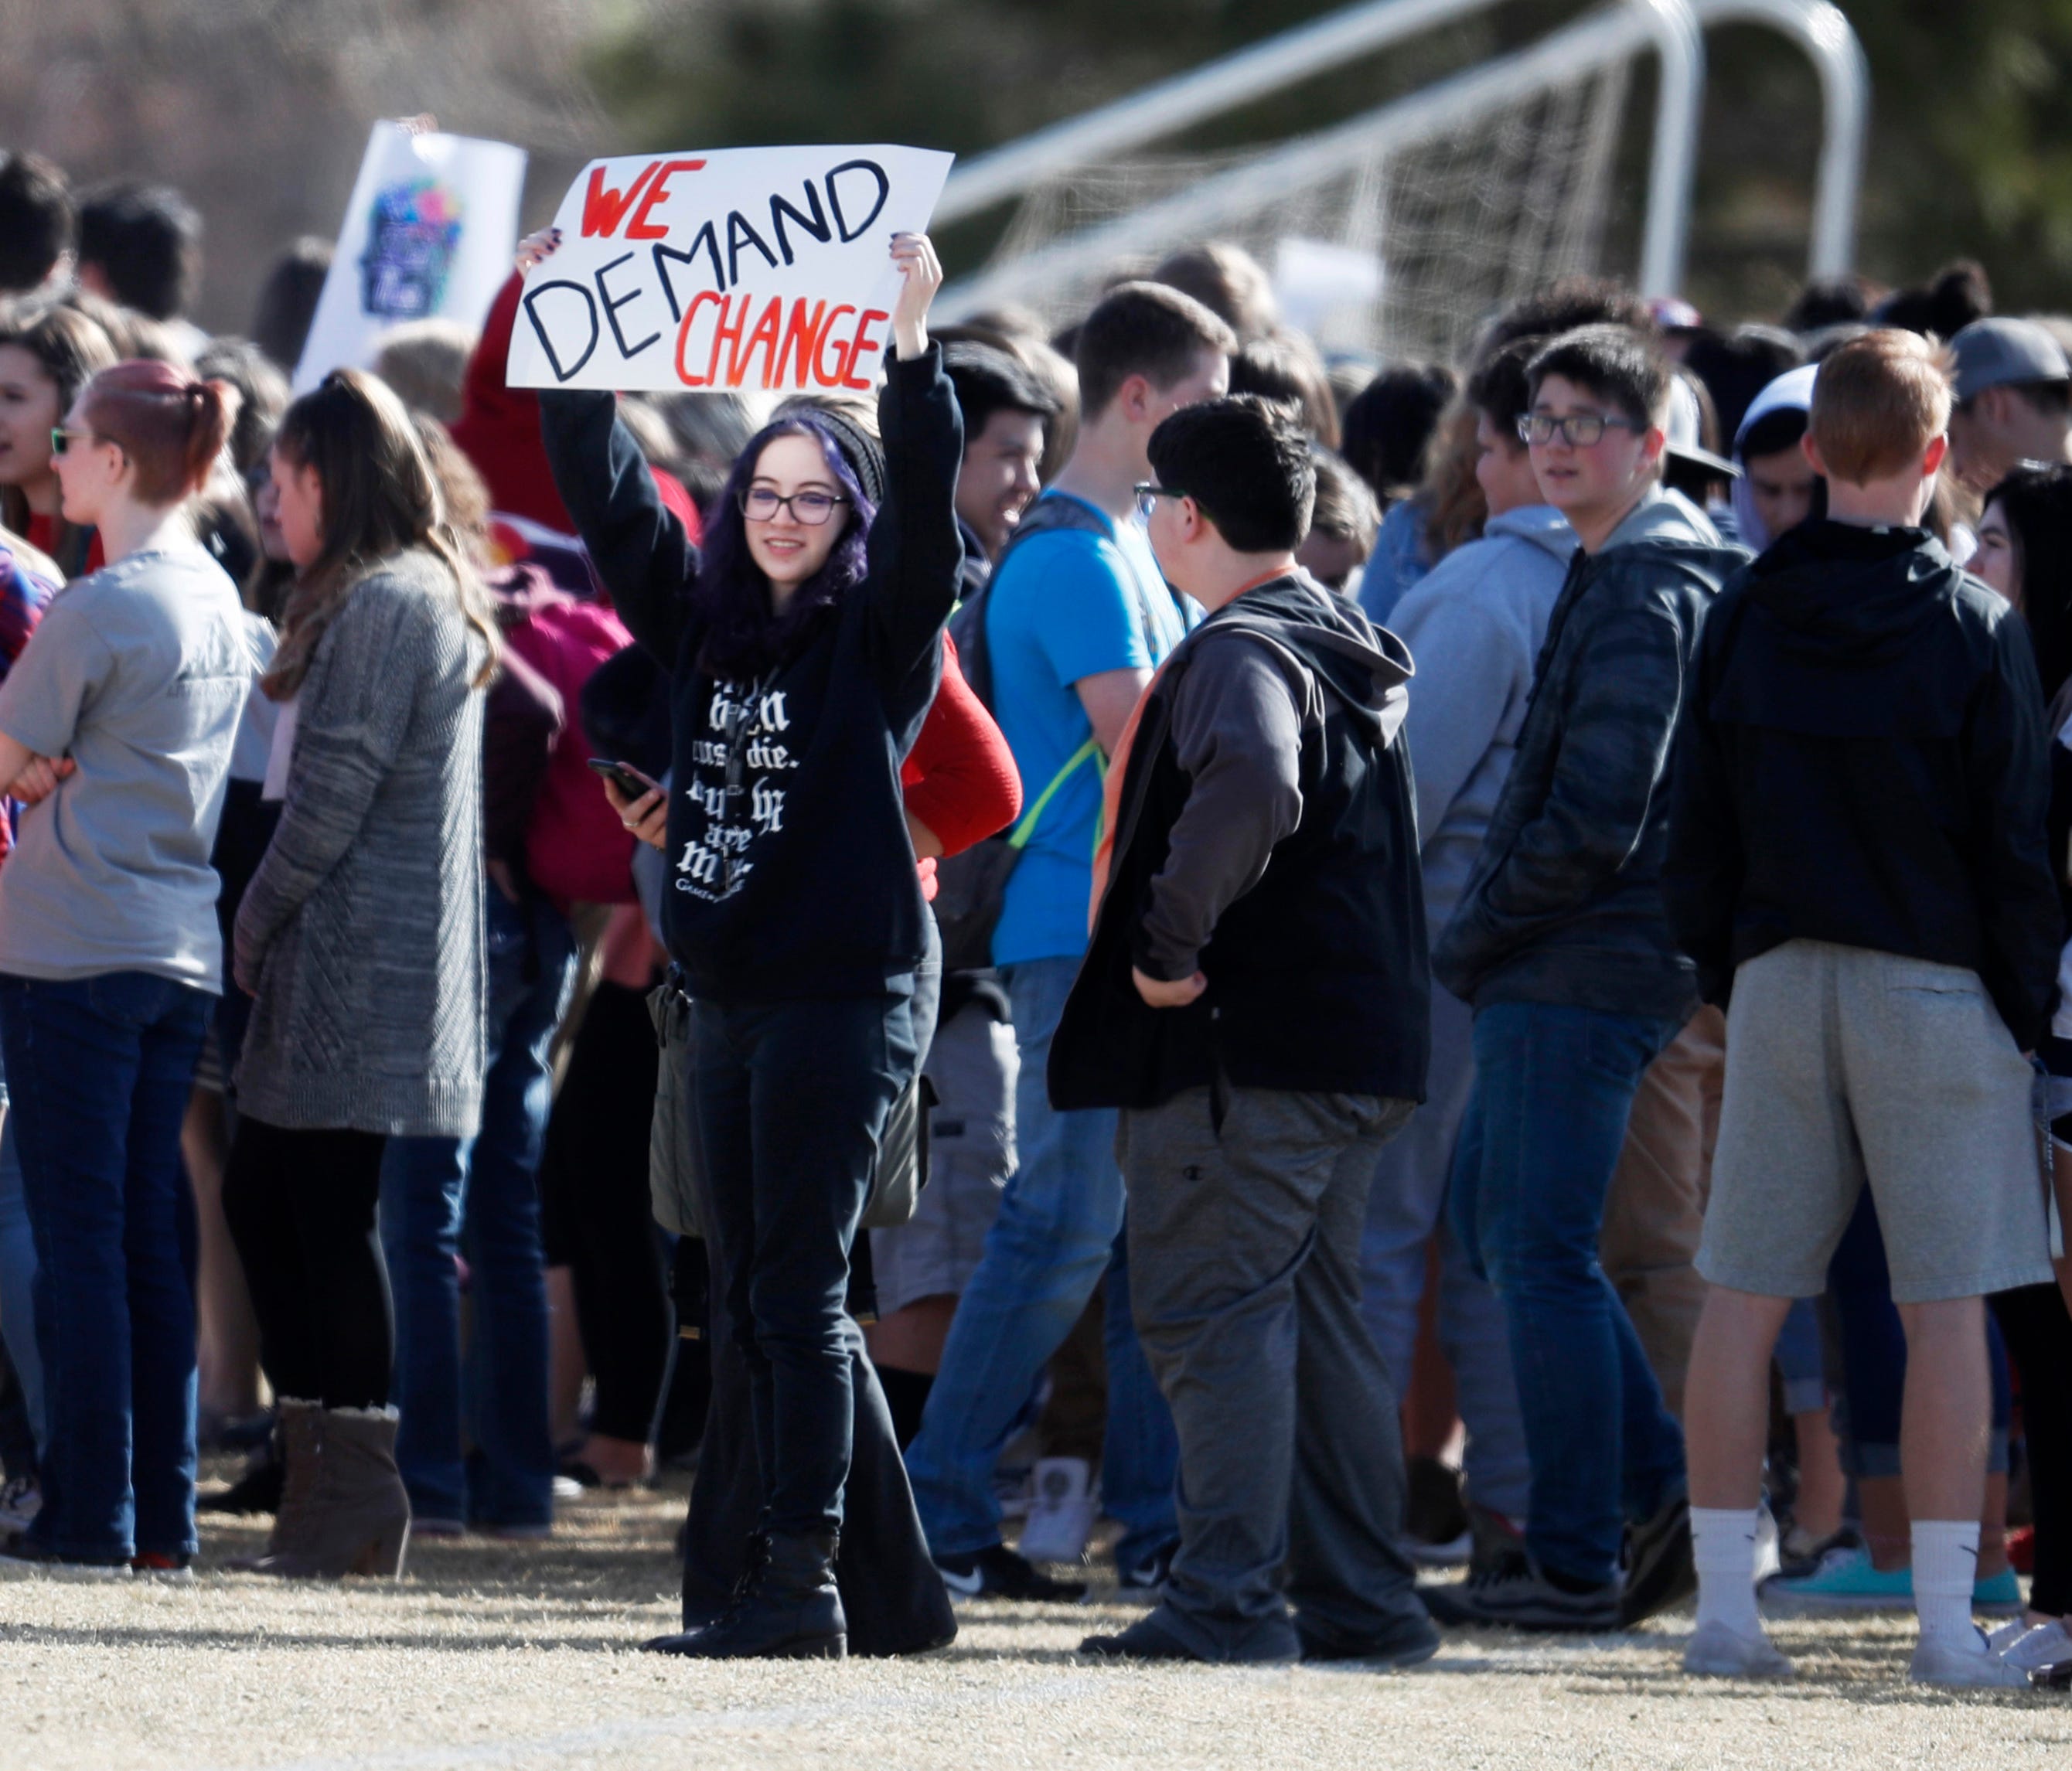 A student waves a sign as classmates gather during a student walkout to protest gun violence on the soccer field behind Columbine High School in Littleton, Colo.